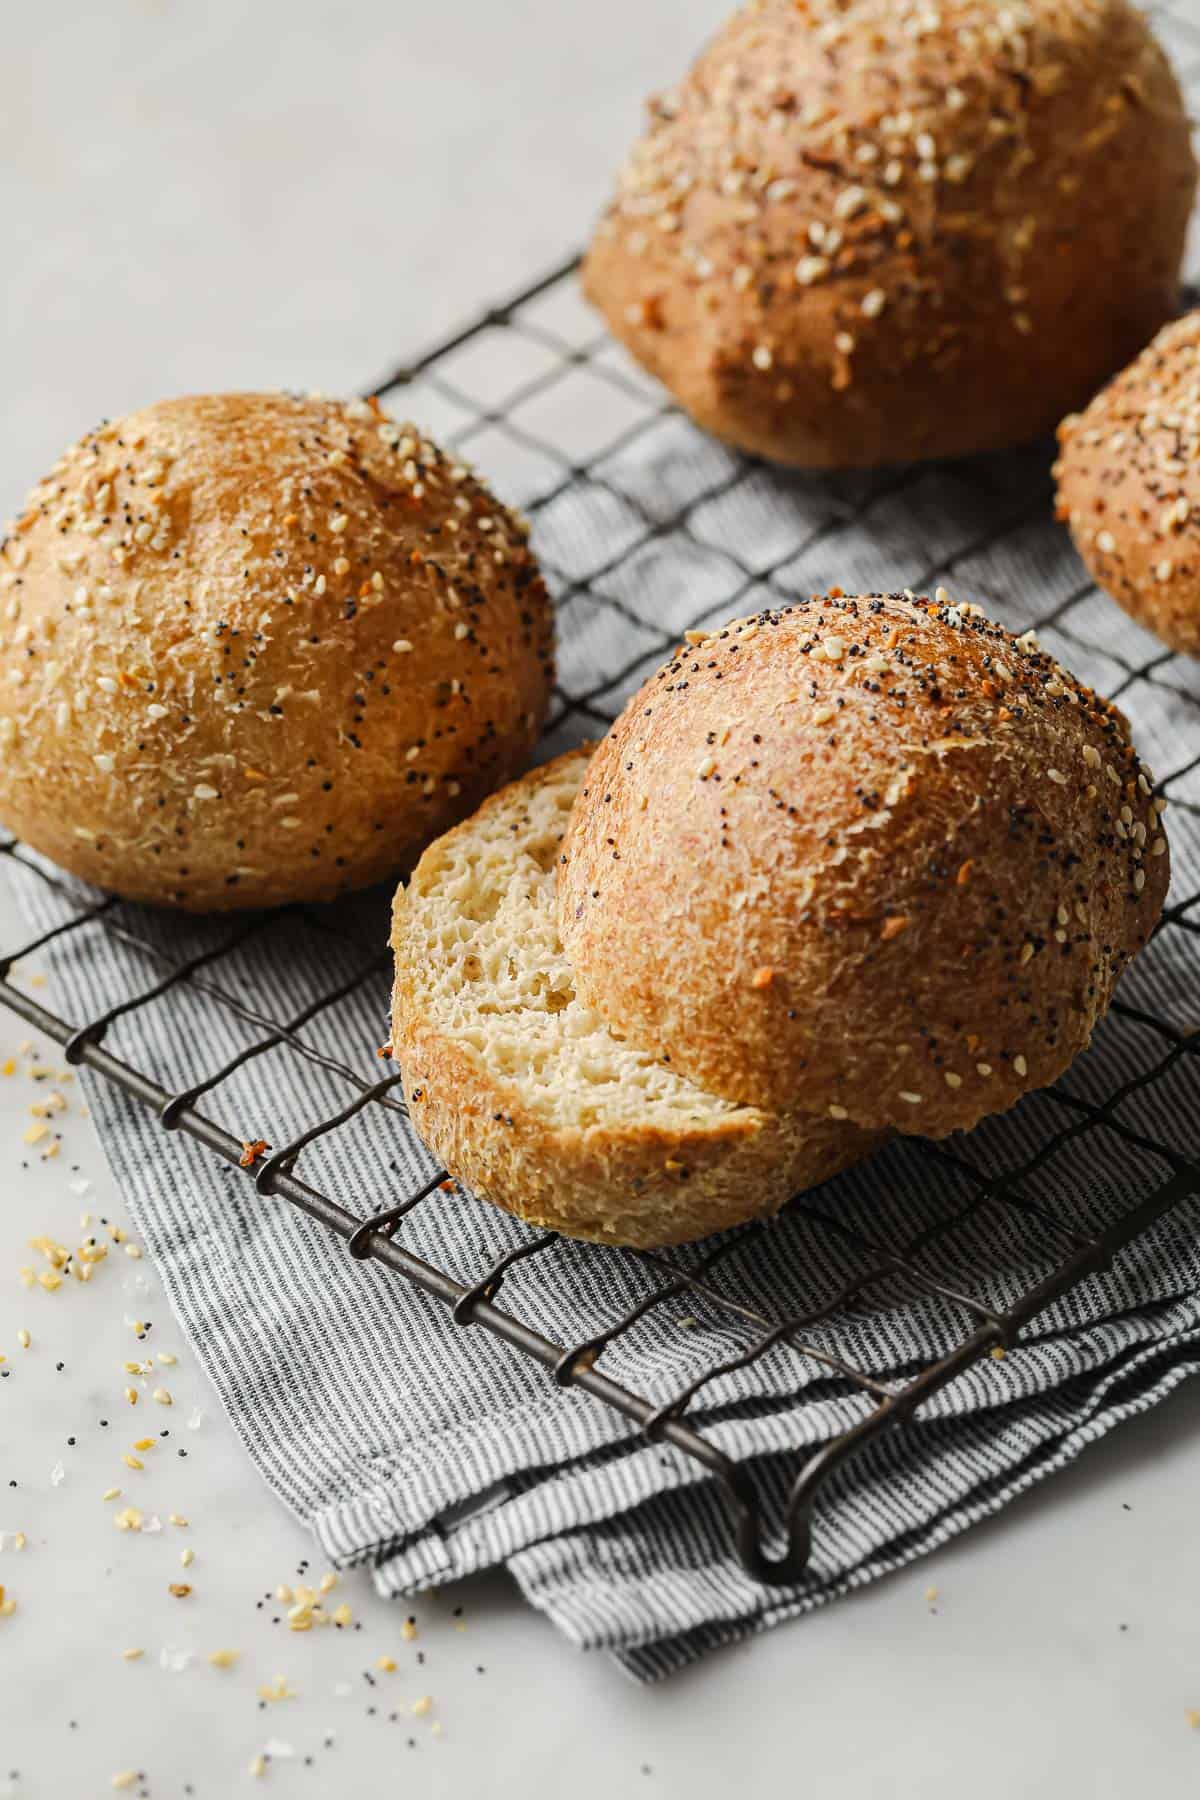 low carb sandwich rolls topped with everything bagel seasoning in a basket lined with parchment paper